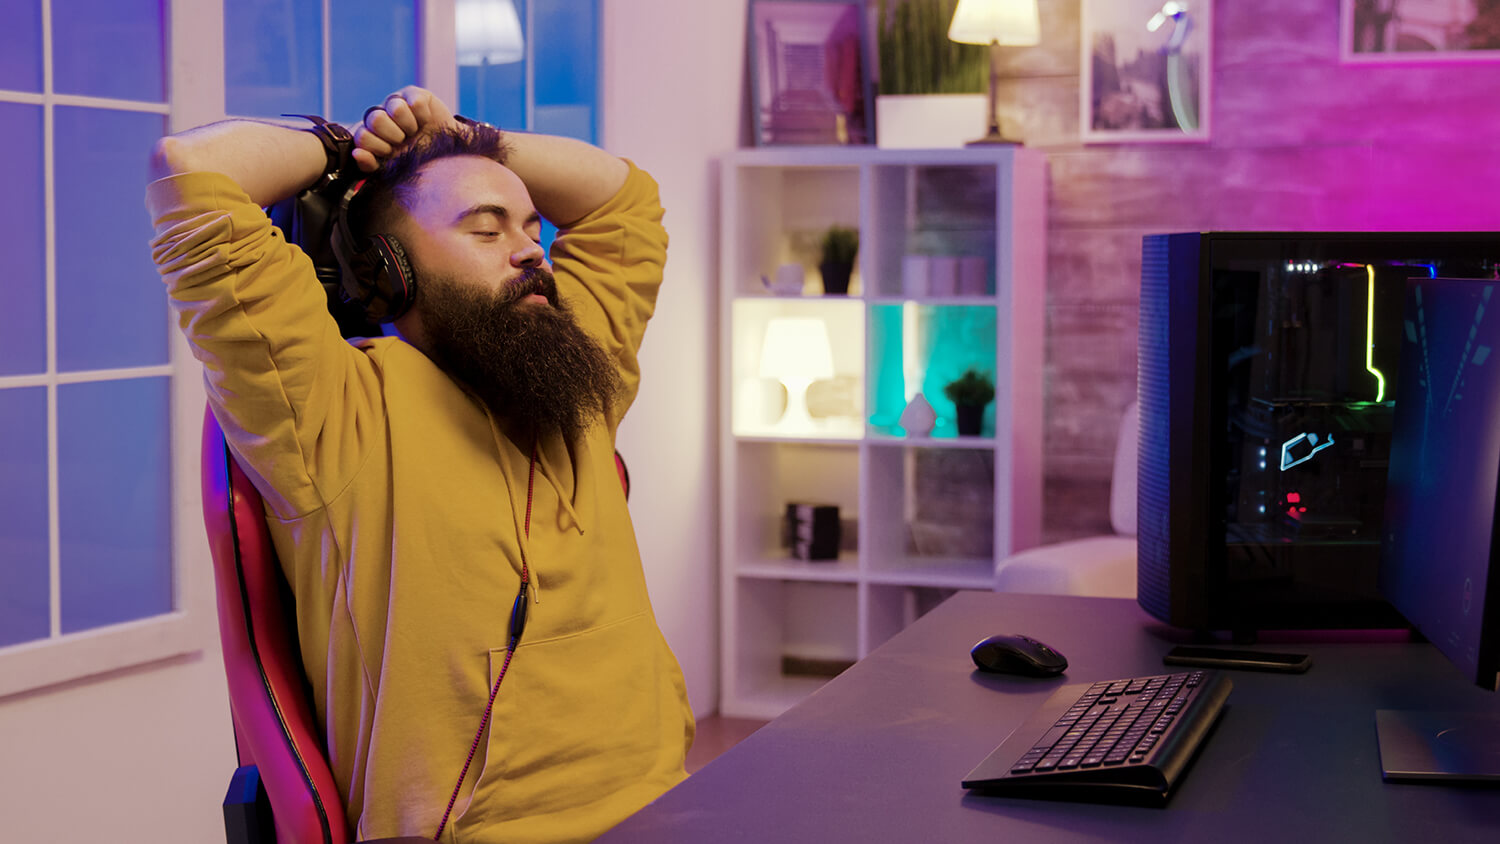 happy bearded man after wining online gaming man wearing headphones while playing video games1 | چیپکد